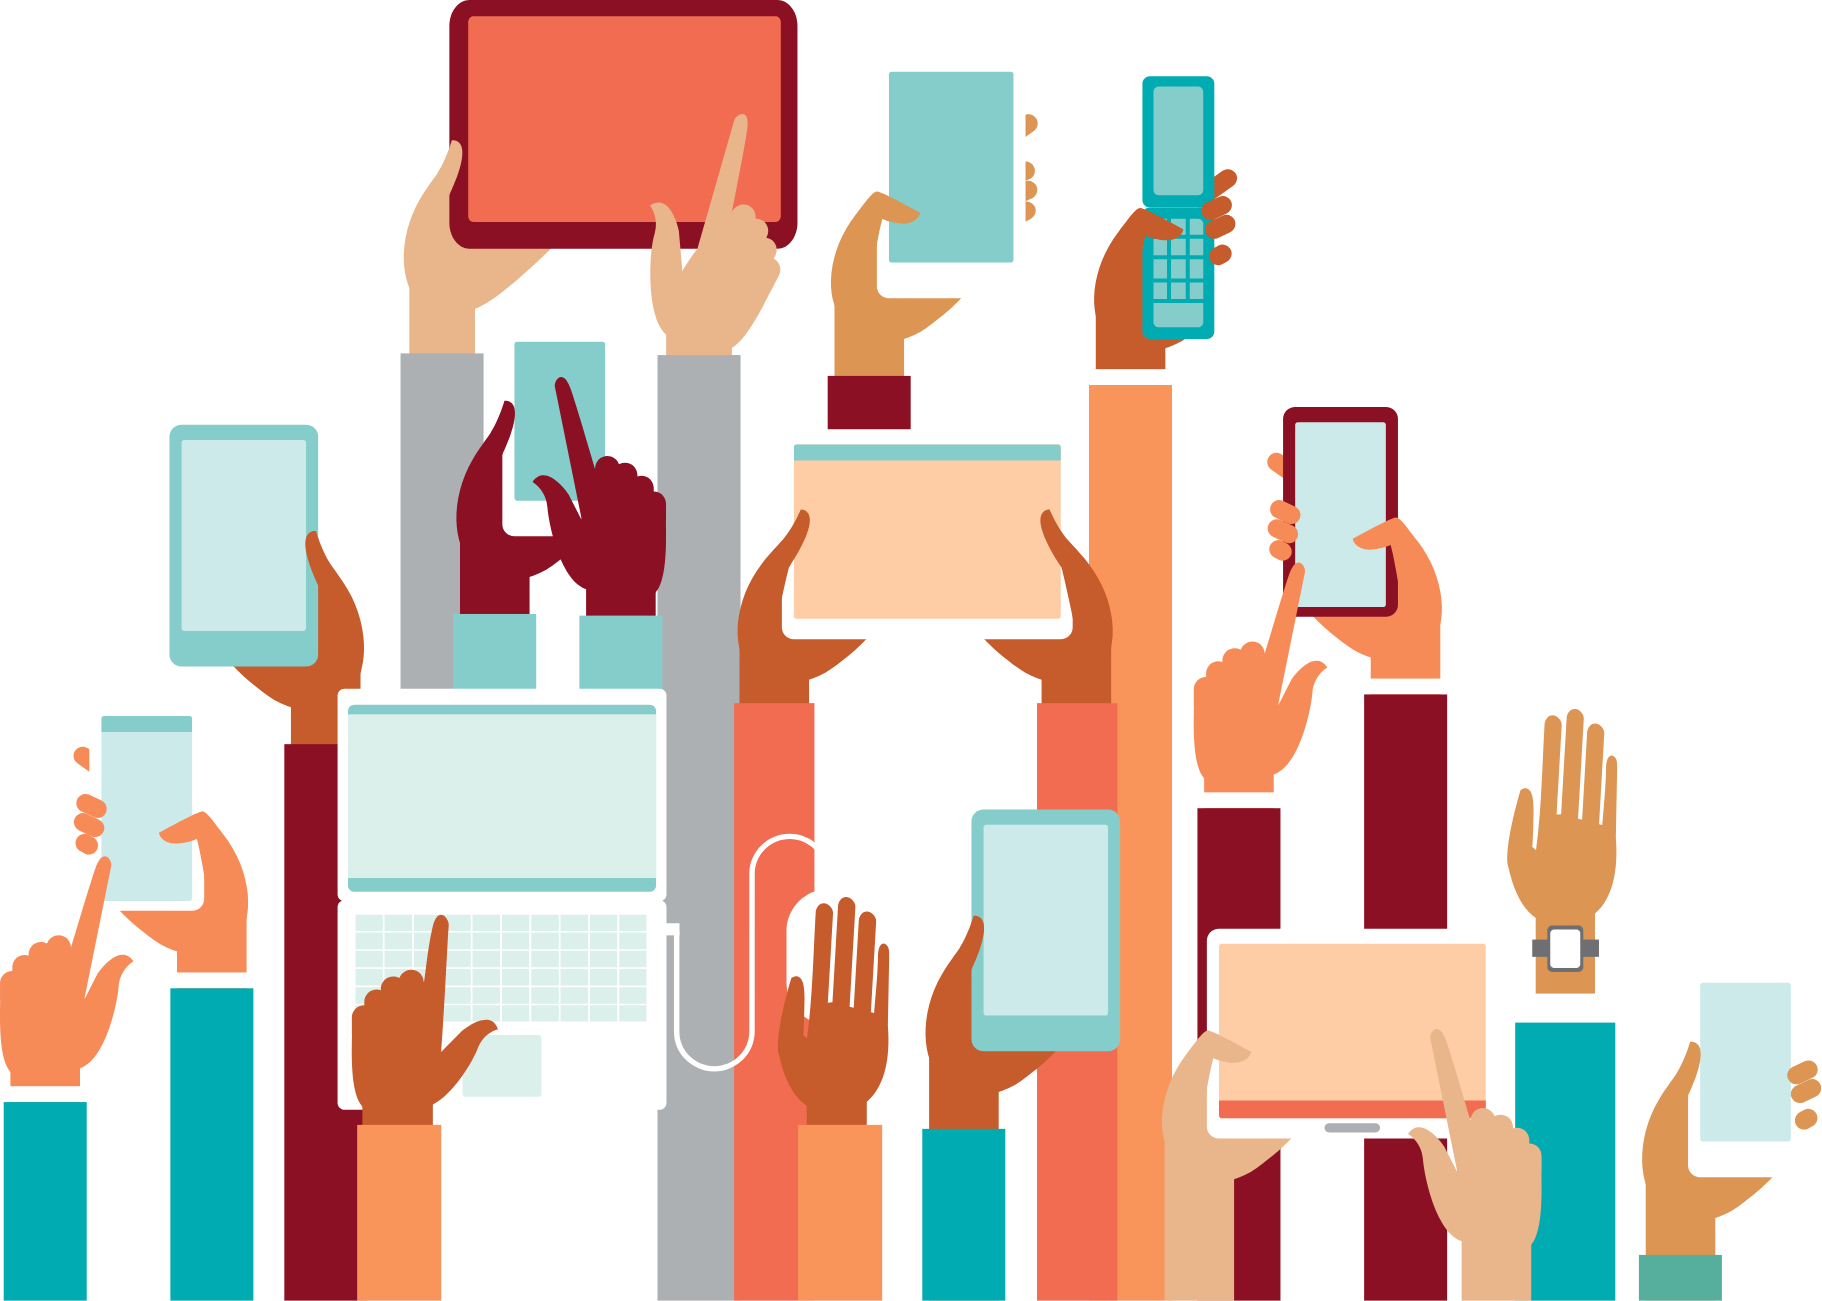 Illustration of several hands holding up various devices including laptop, tablets, and phones